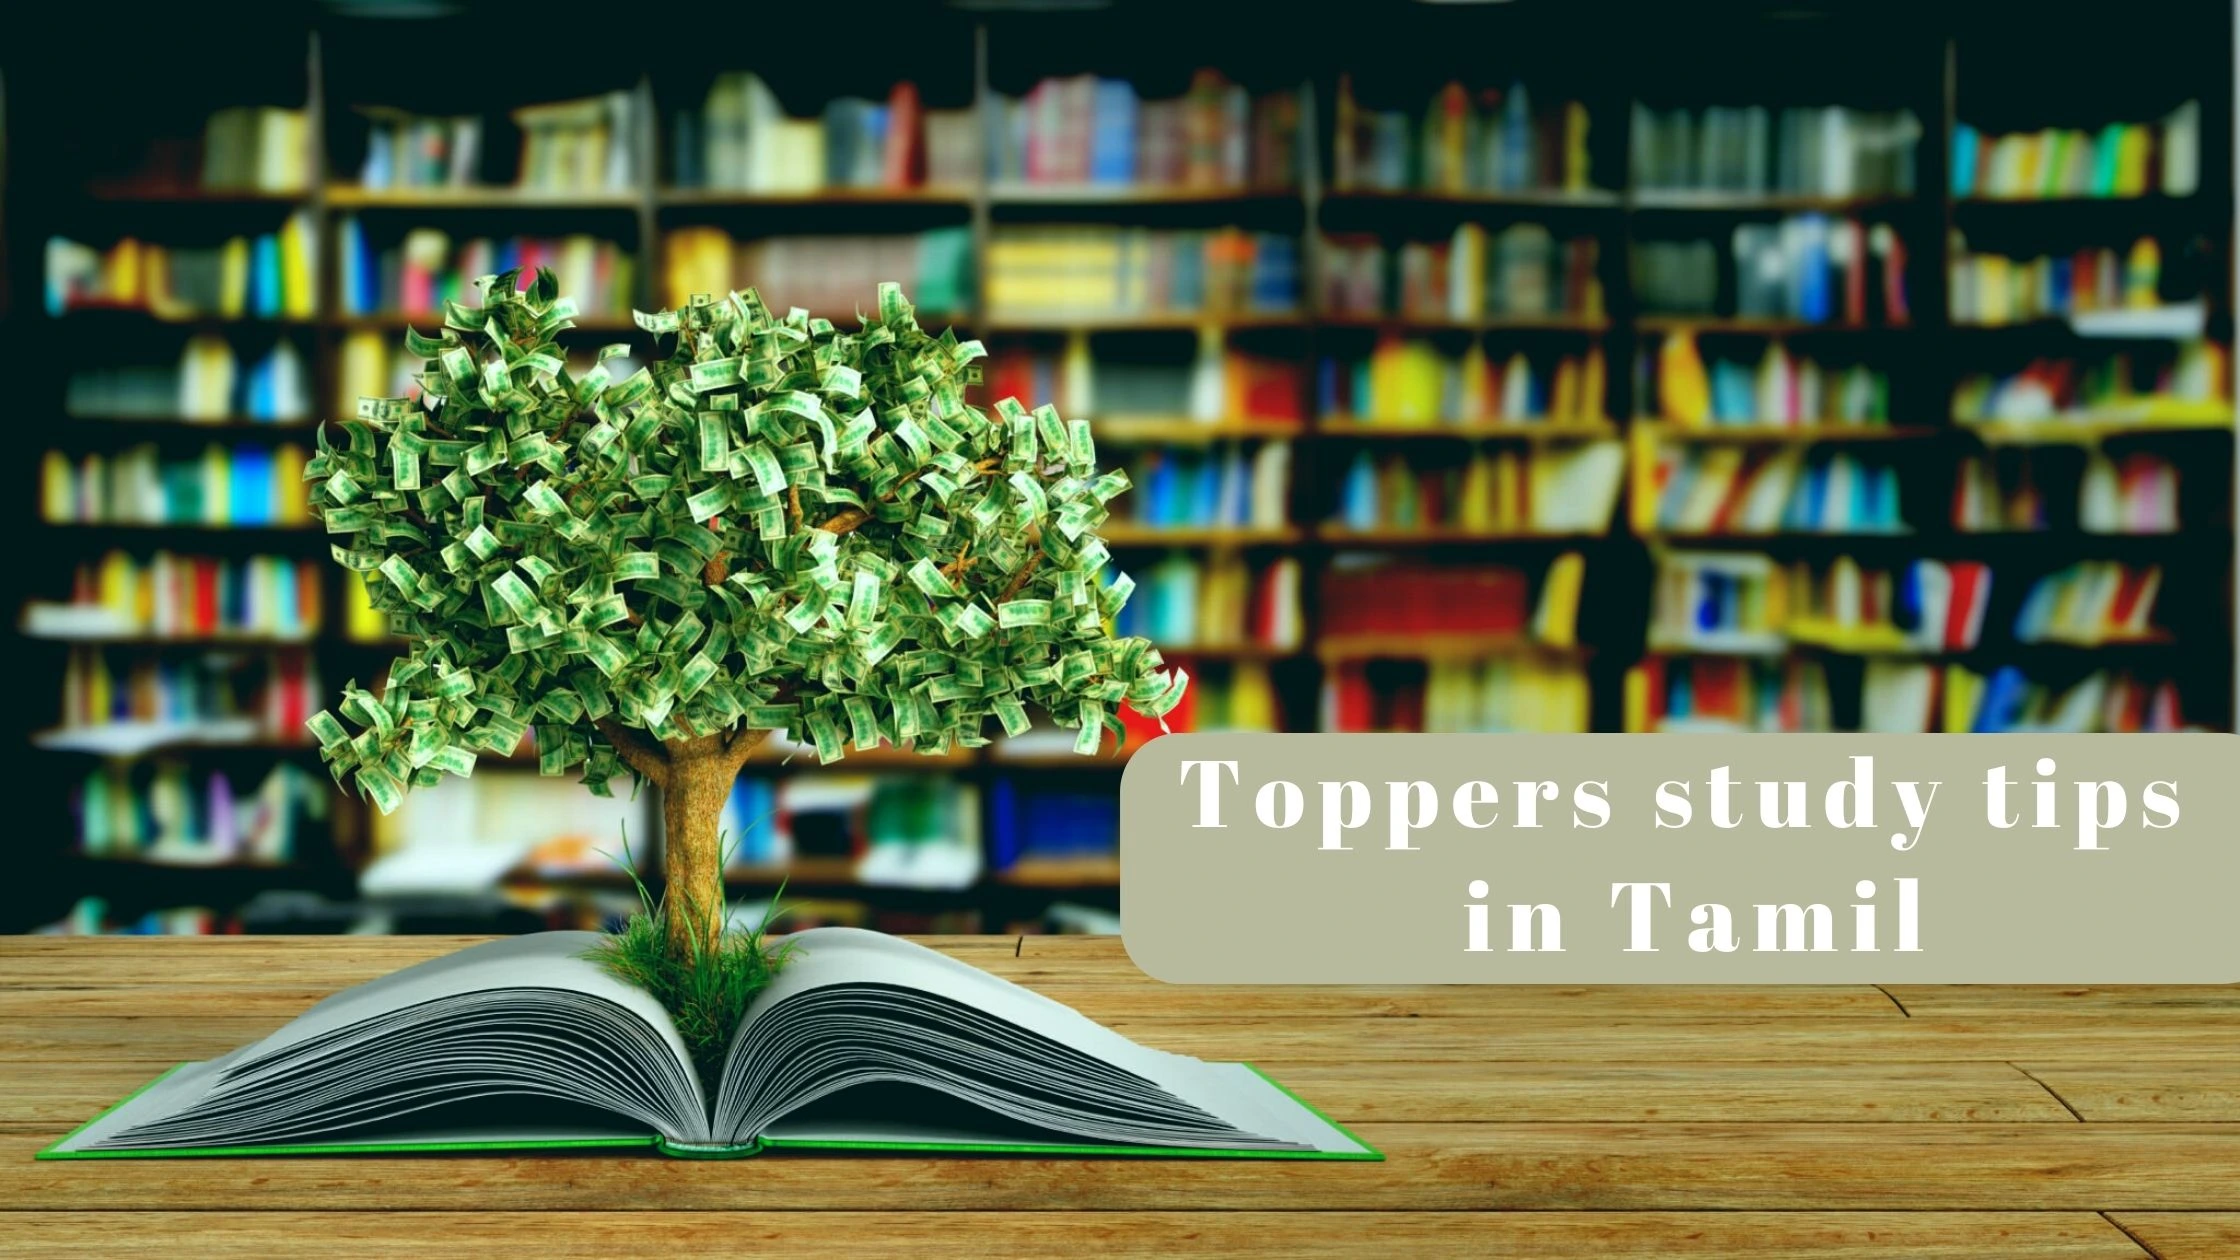 Toppers study tips in Tamil